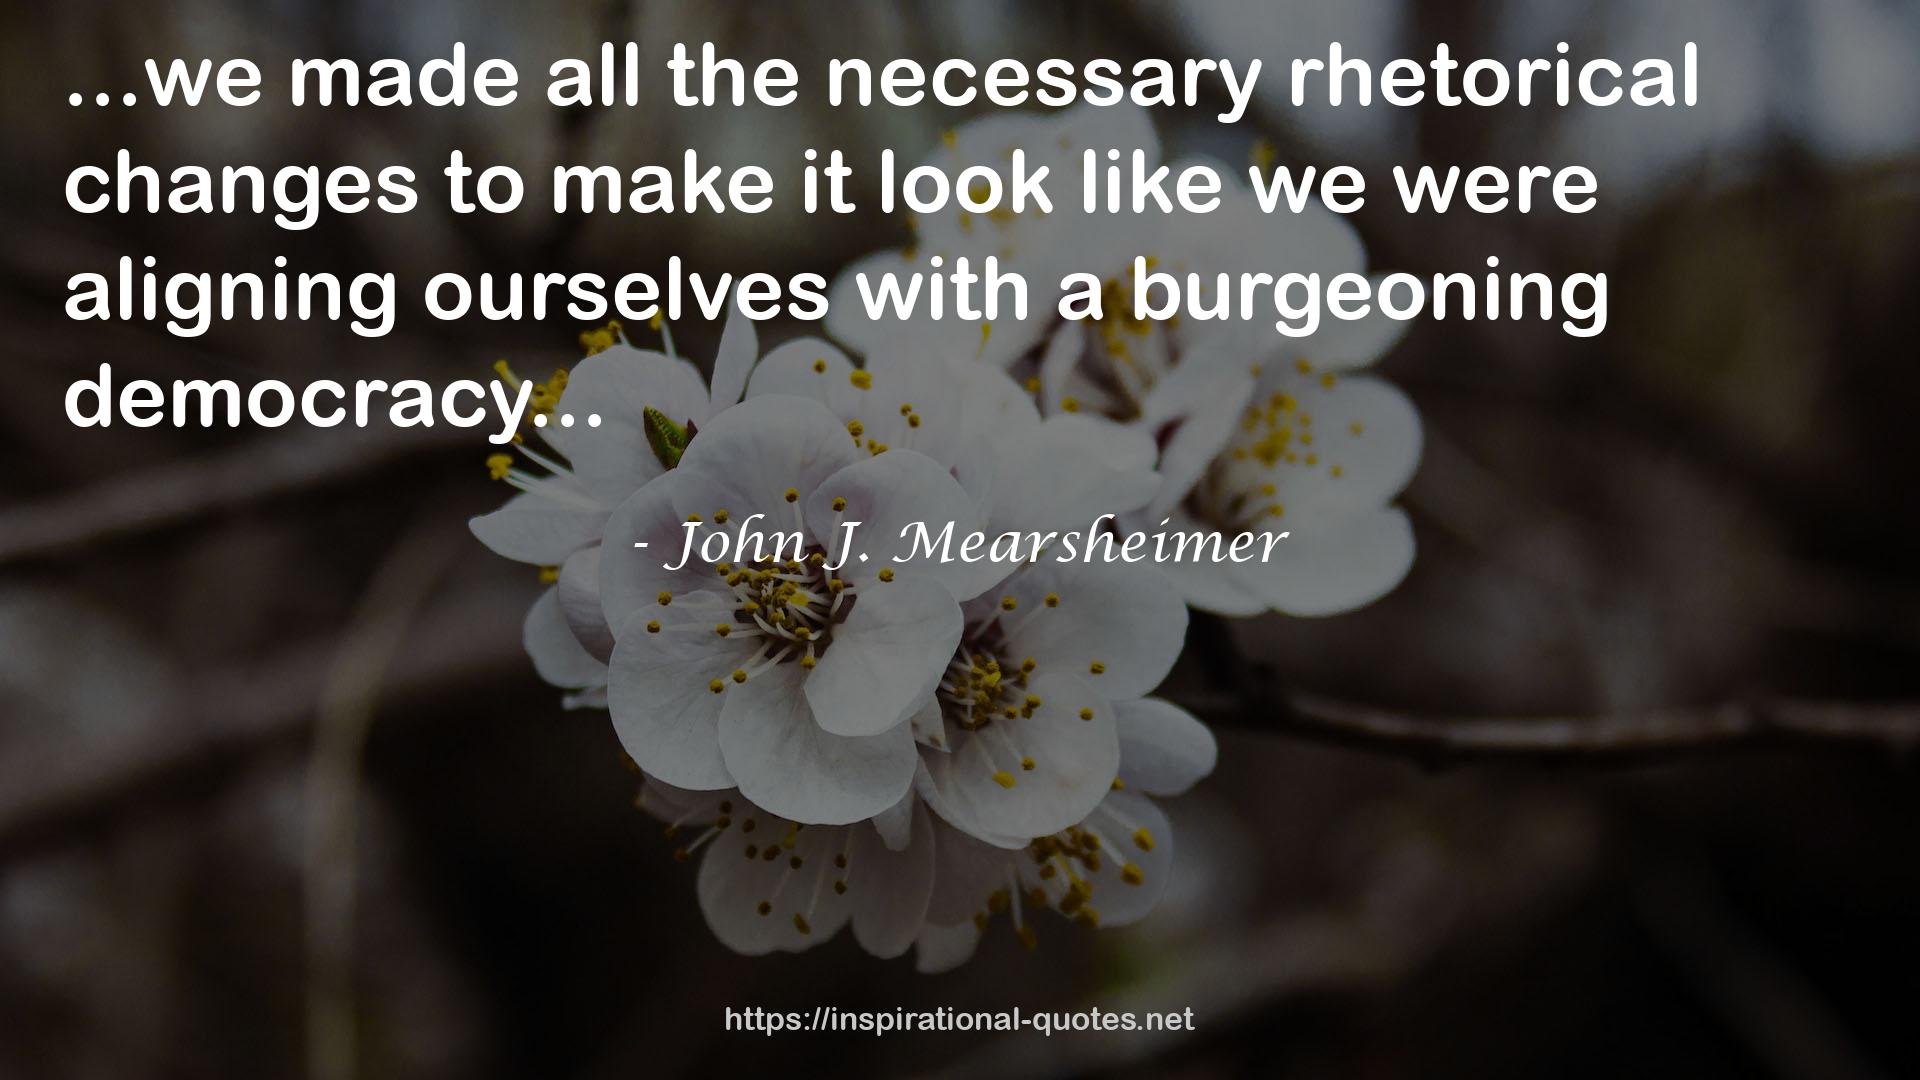 John J. Mearsheimer QUOTES